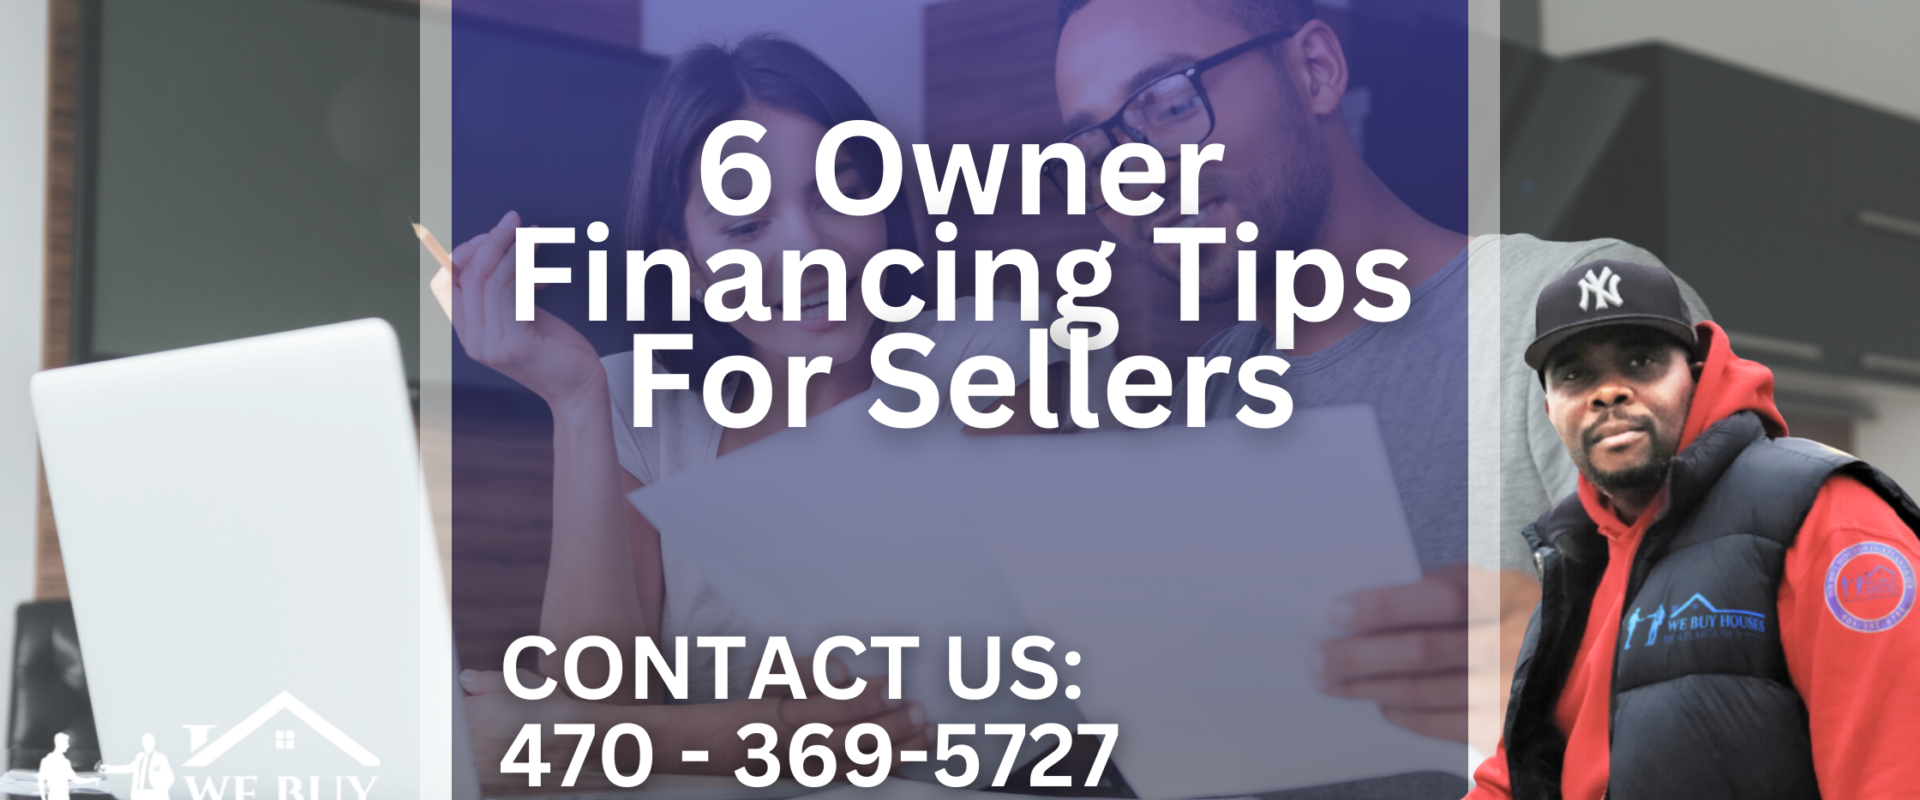 6 Owner Financing Tips For Sellers